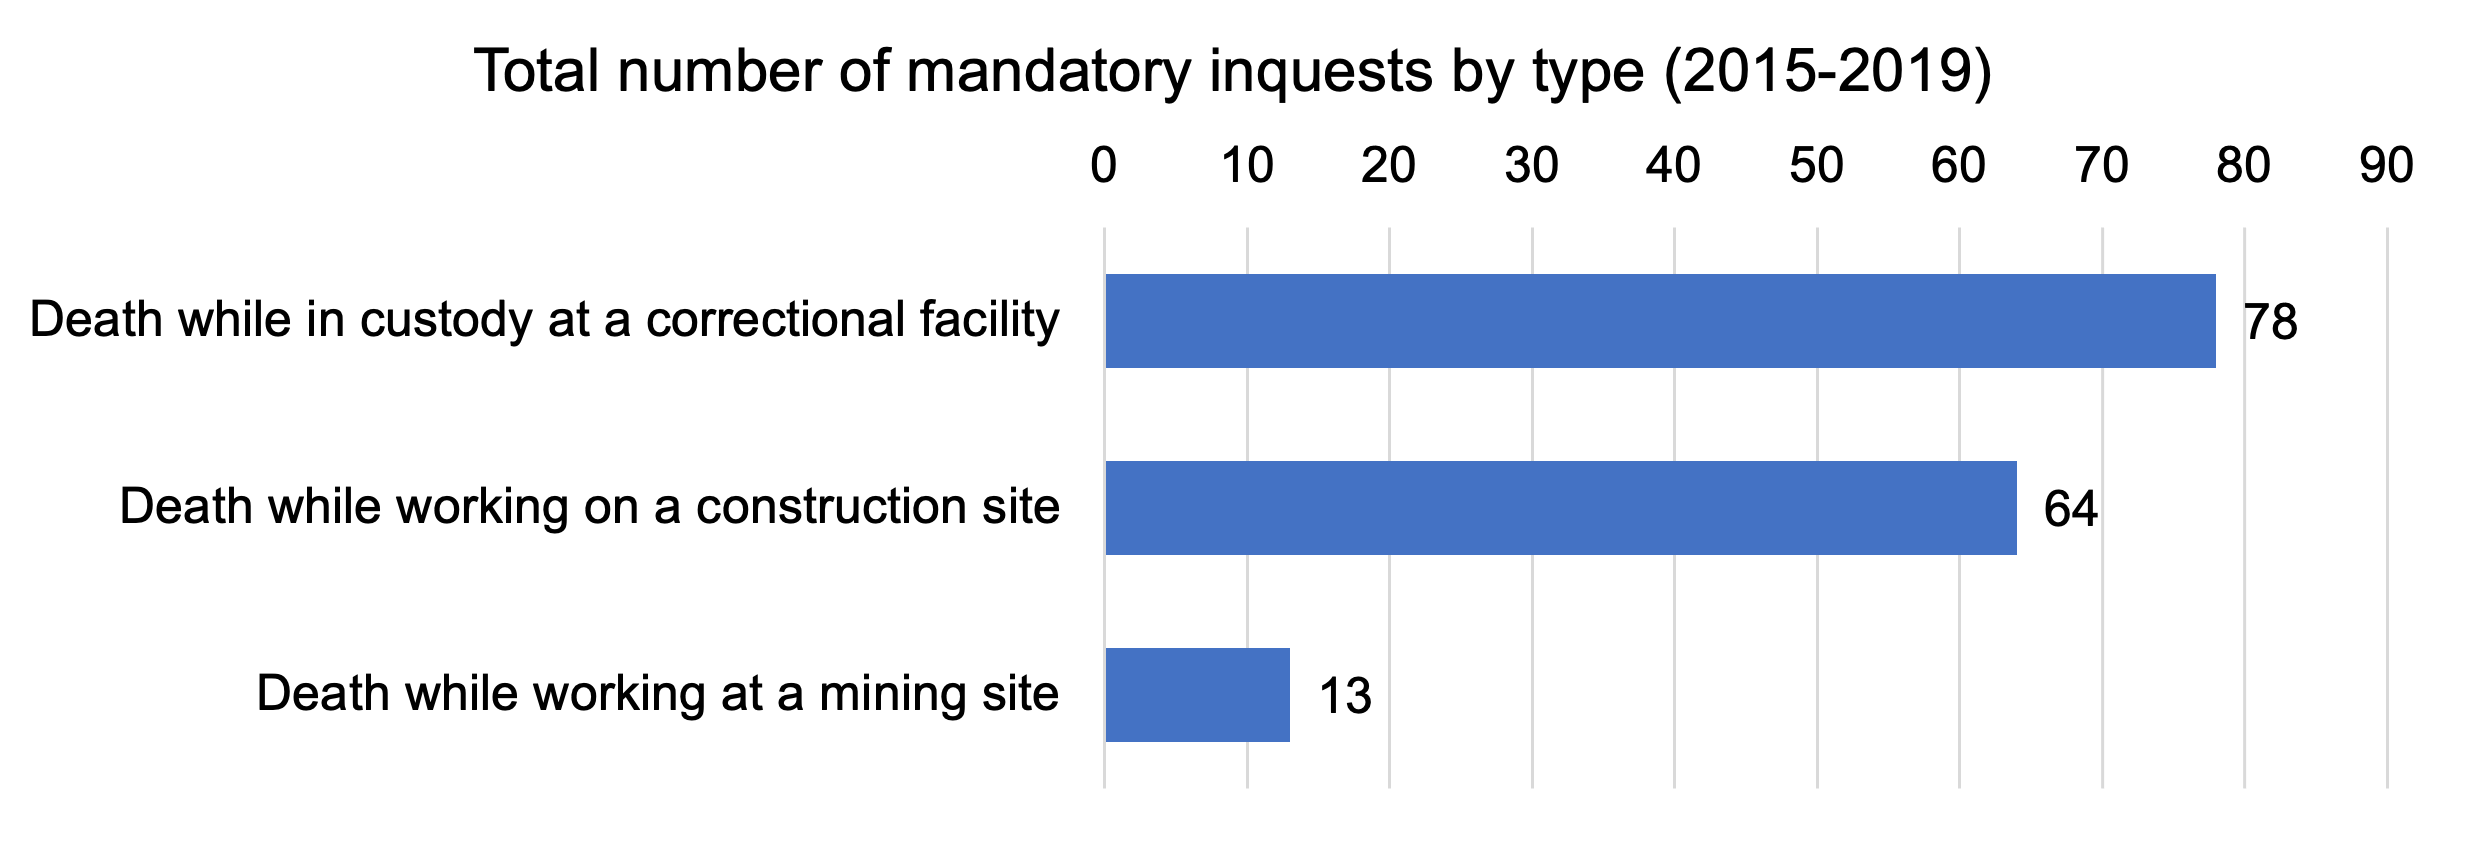 Mandatory inquests by type: Graph showing total number of mandatory inquests by type from 2015 to 2019. There were 78 deaths that occurred while in custody at a correctional facility, 64 deaths while working on a construction site and 13 deaths while working at a mining site.